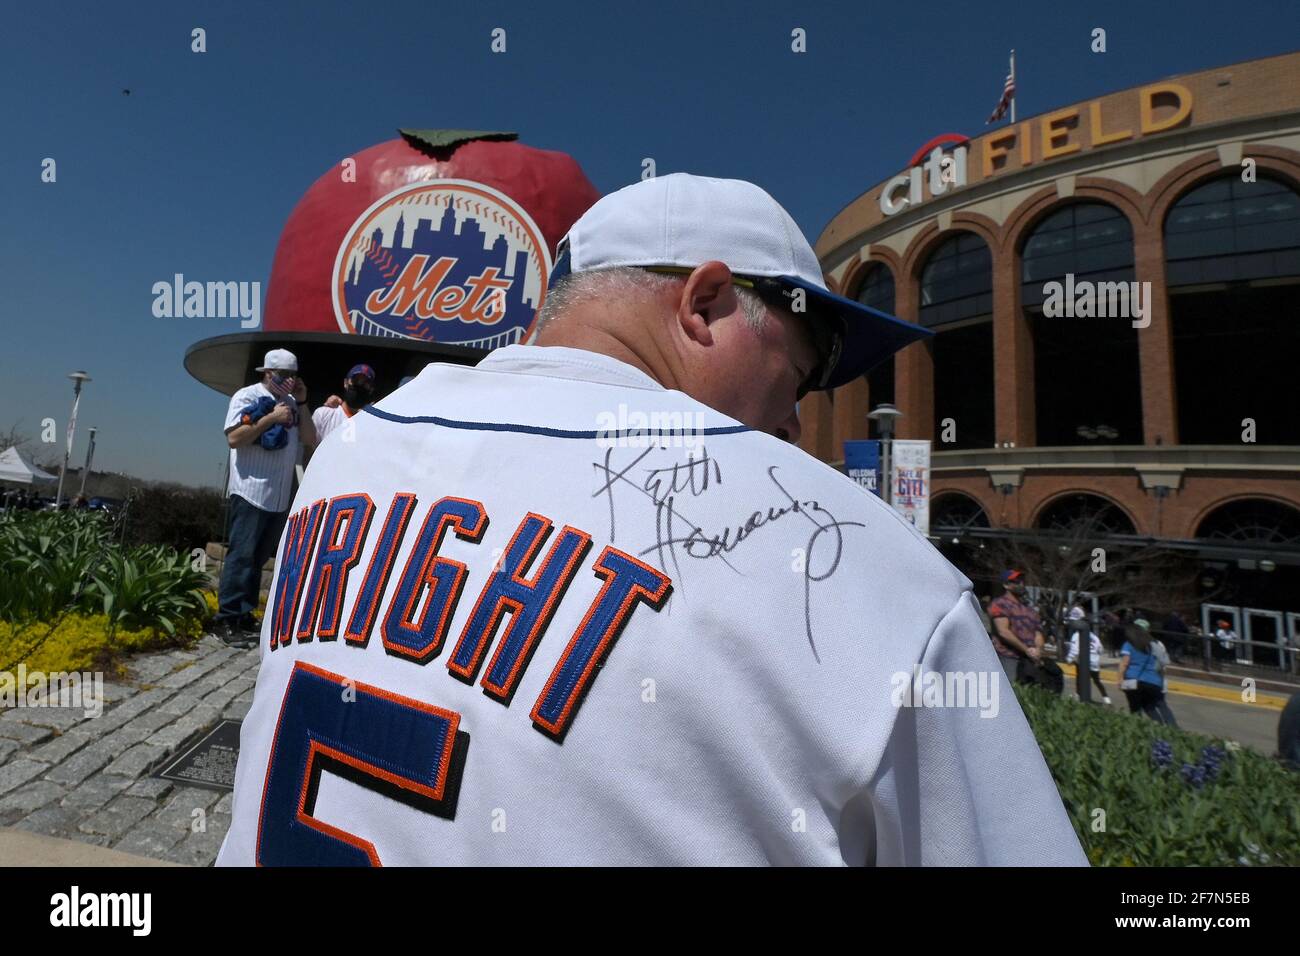 New York, USA. 08th Apr, 2021. A man shows off a baseball shirt signed by  former Mets player Keith Hernandez outside Citi Field before attending the  New York Mets home opening game